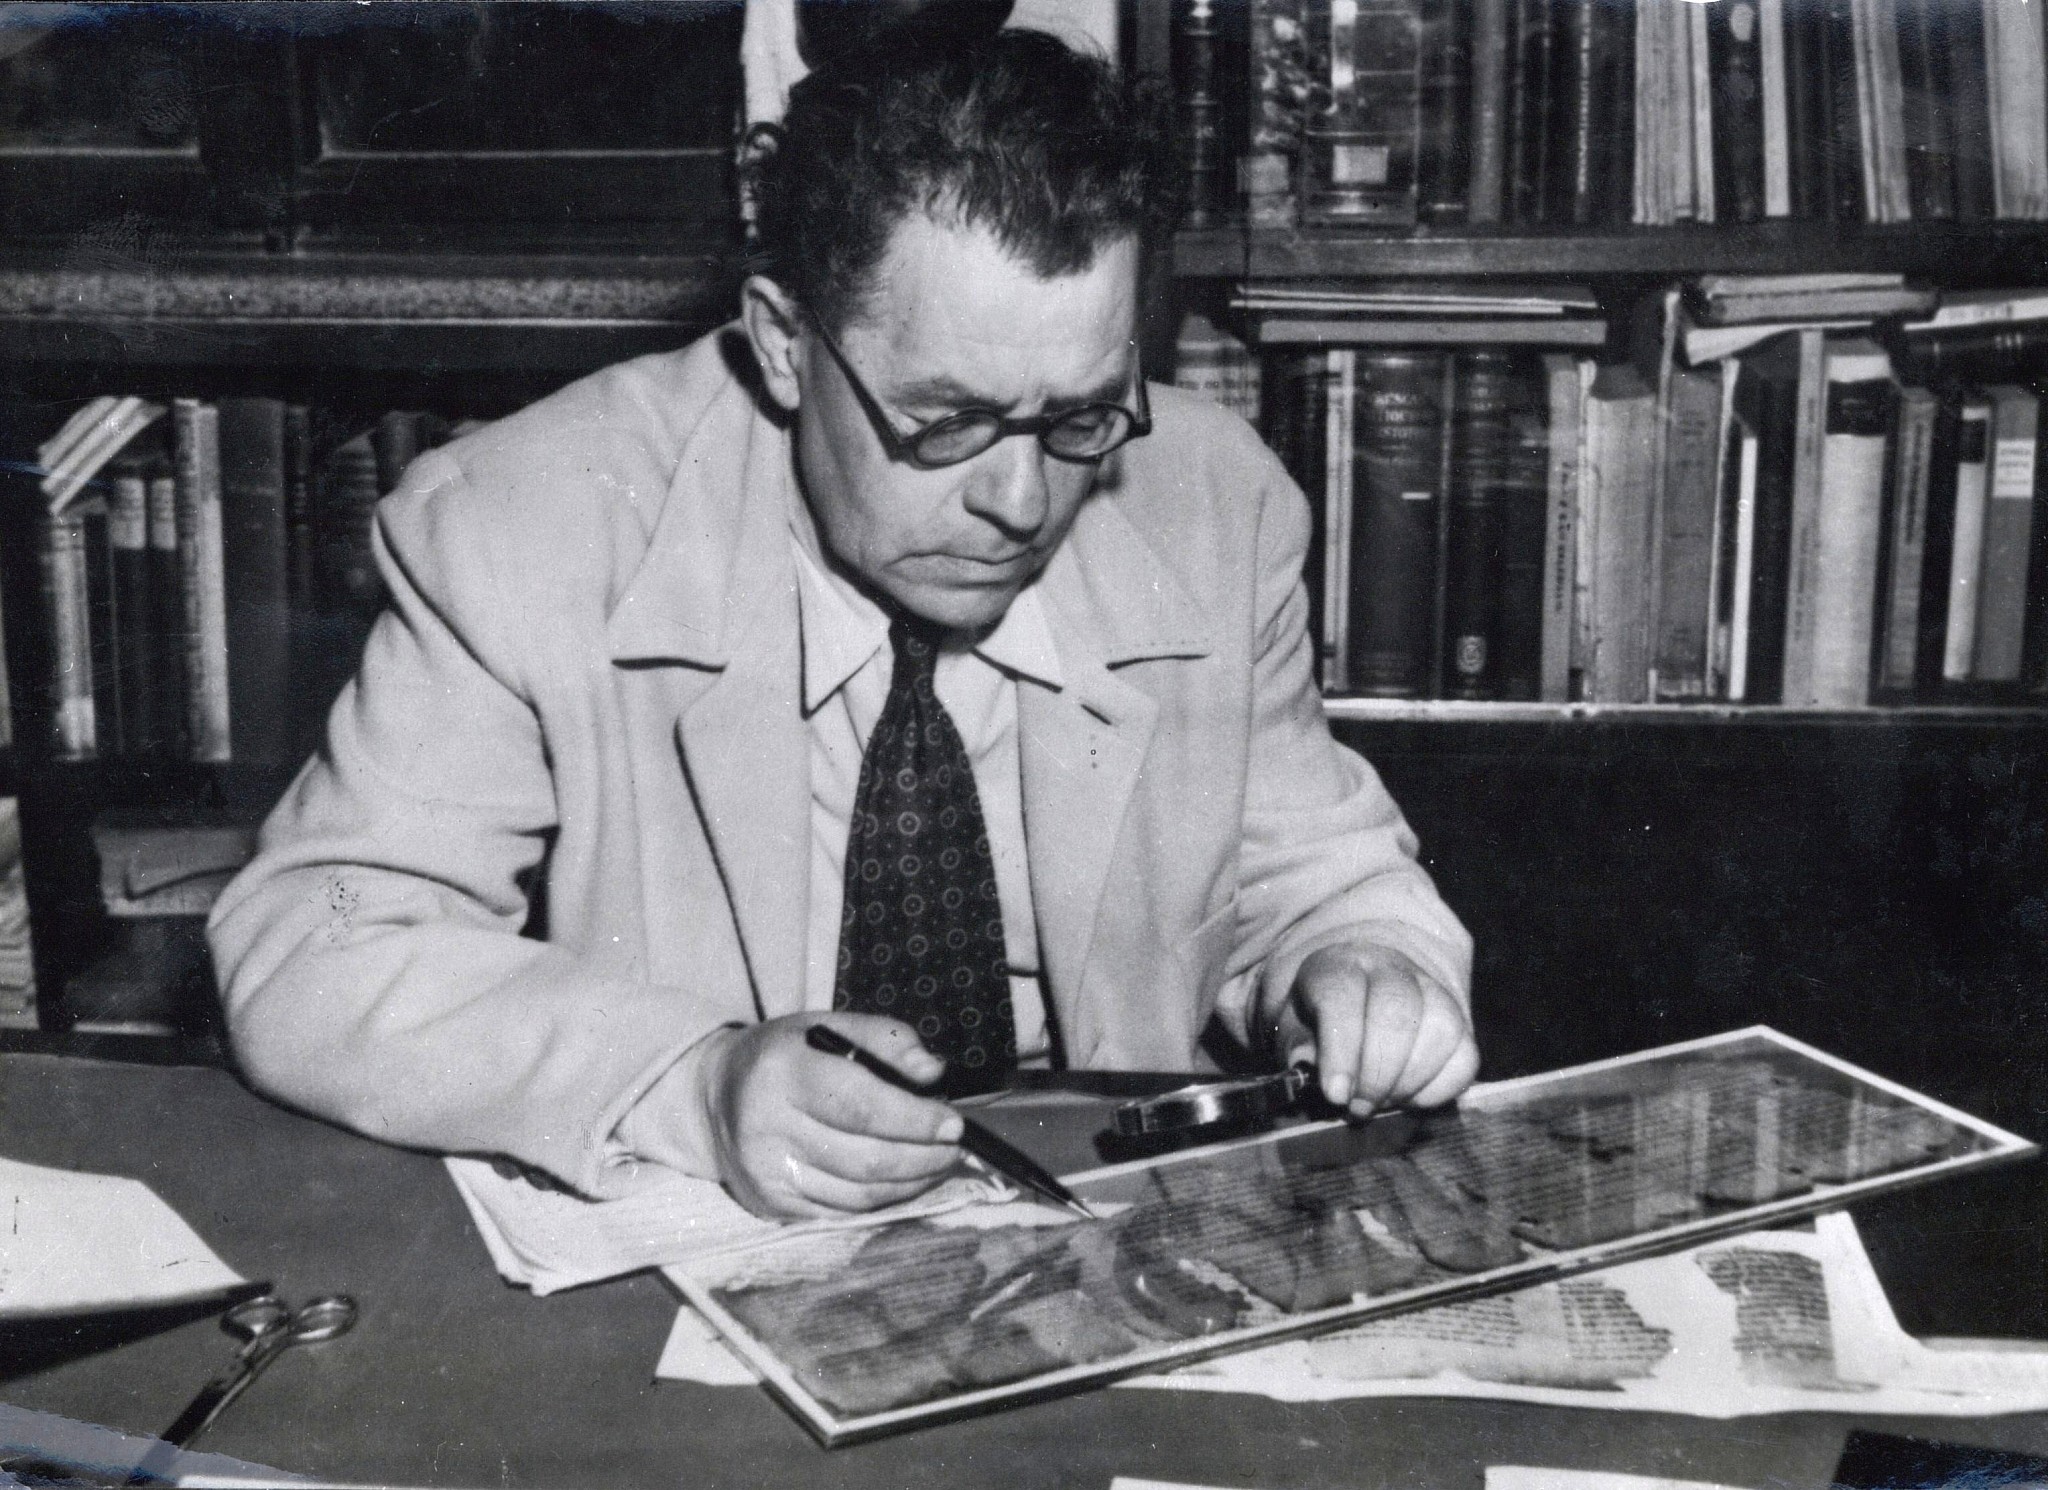 A 1951 image of the Hebrew University's Prof. Eleazar Sukenik with one of the Dead Sea Scrolls. (Department of Archaeology, the Hebrew University, Jerusalem - National Library of Israel, Schwadron collection)